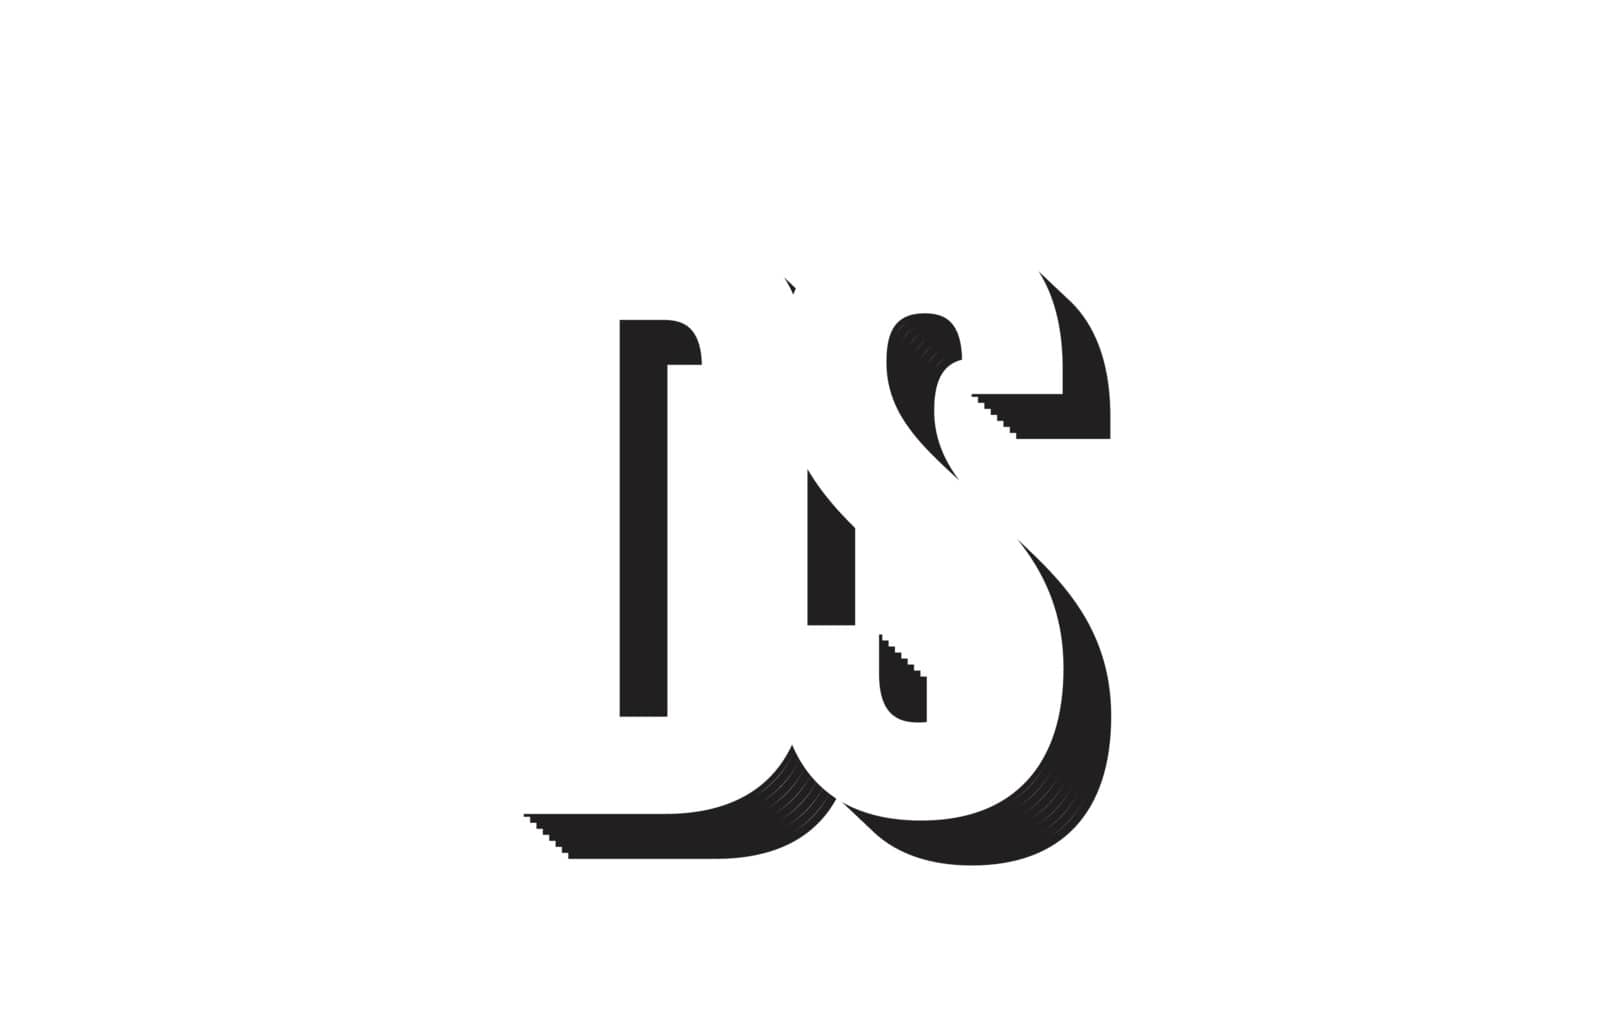 Black and white ds d s alphabet letter combination suitable as a logo for a company or business